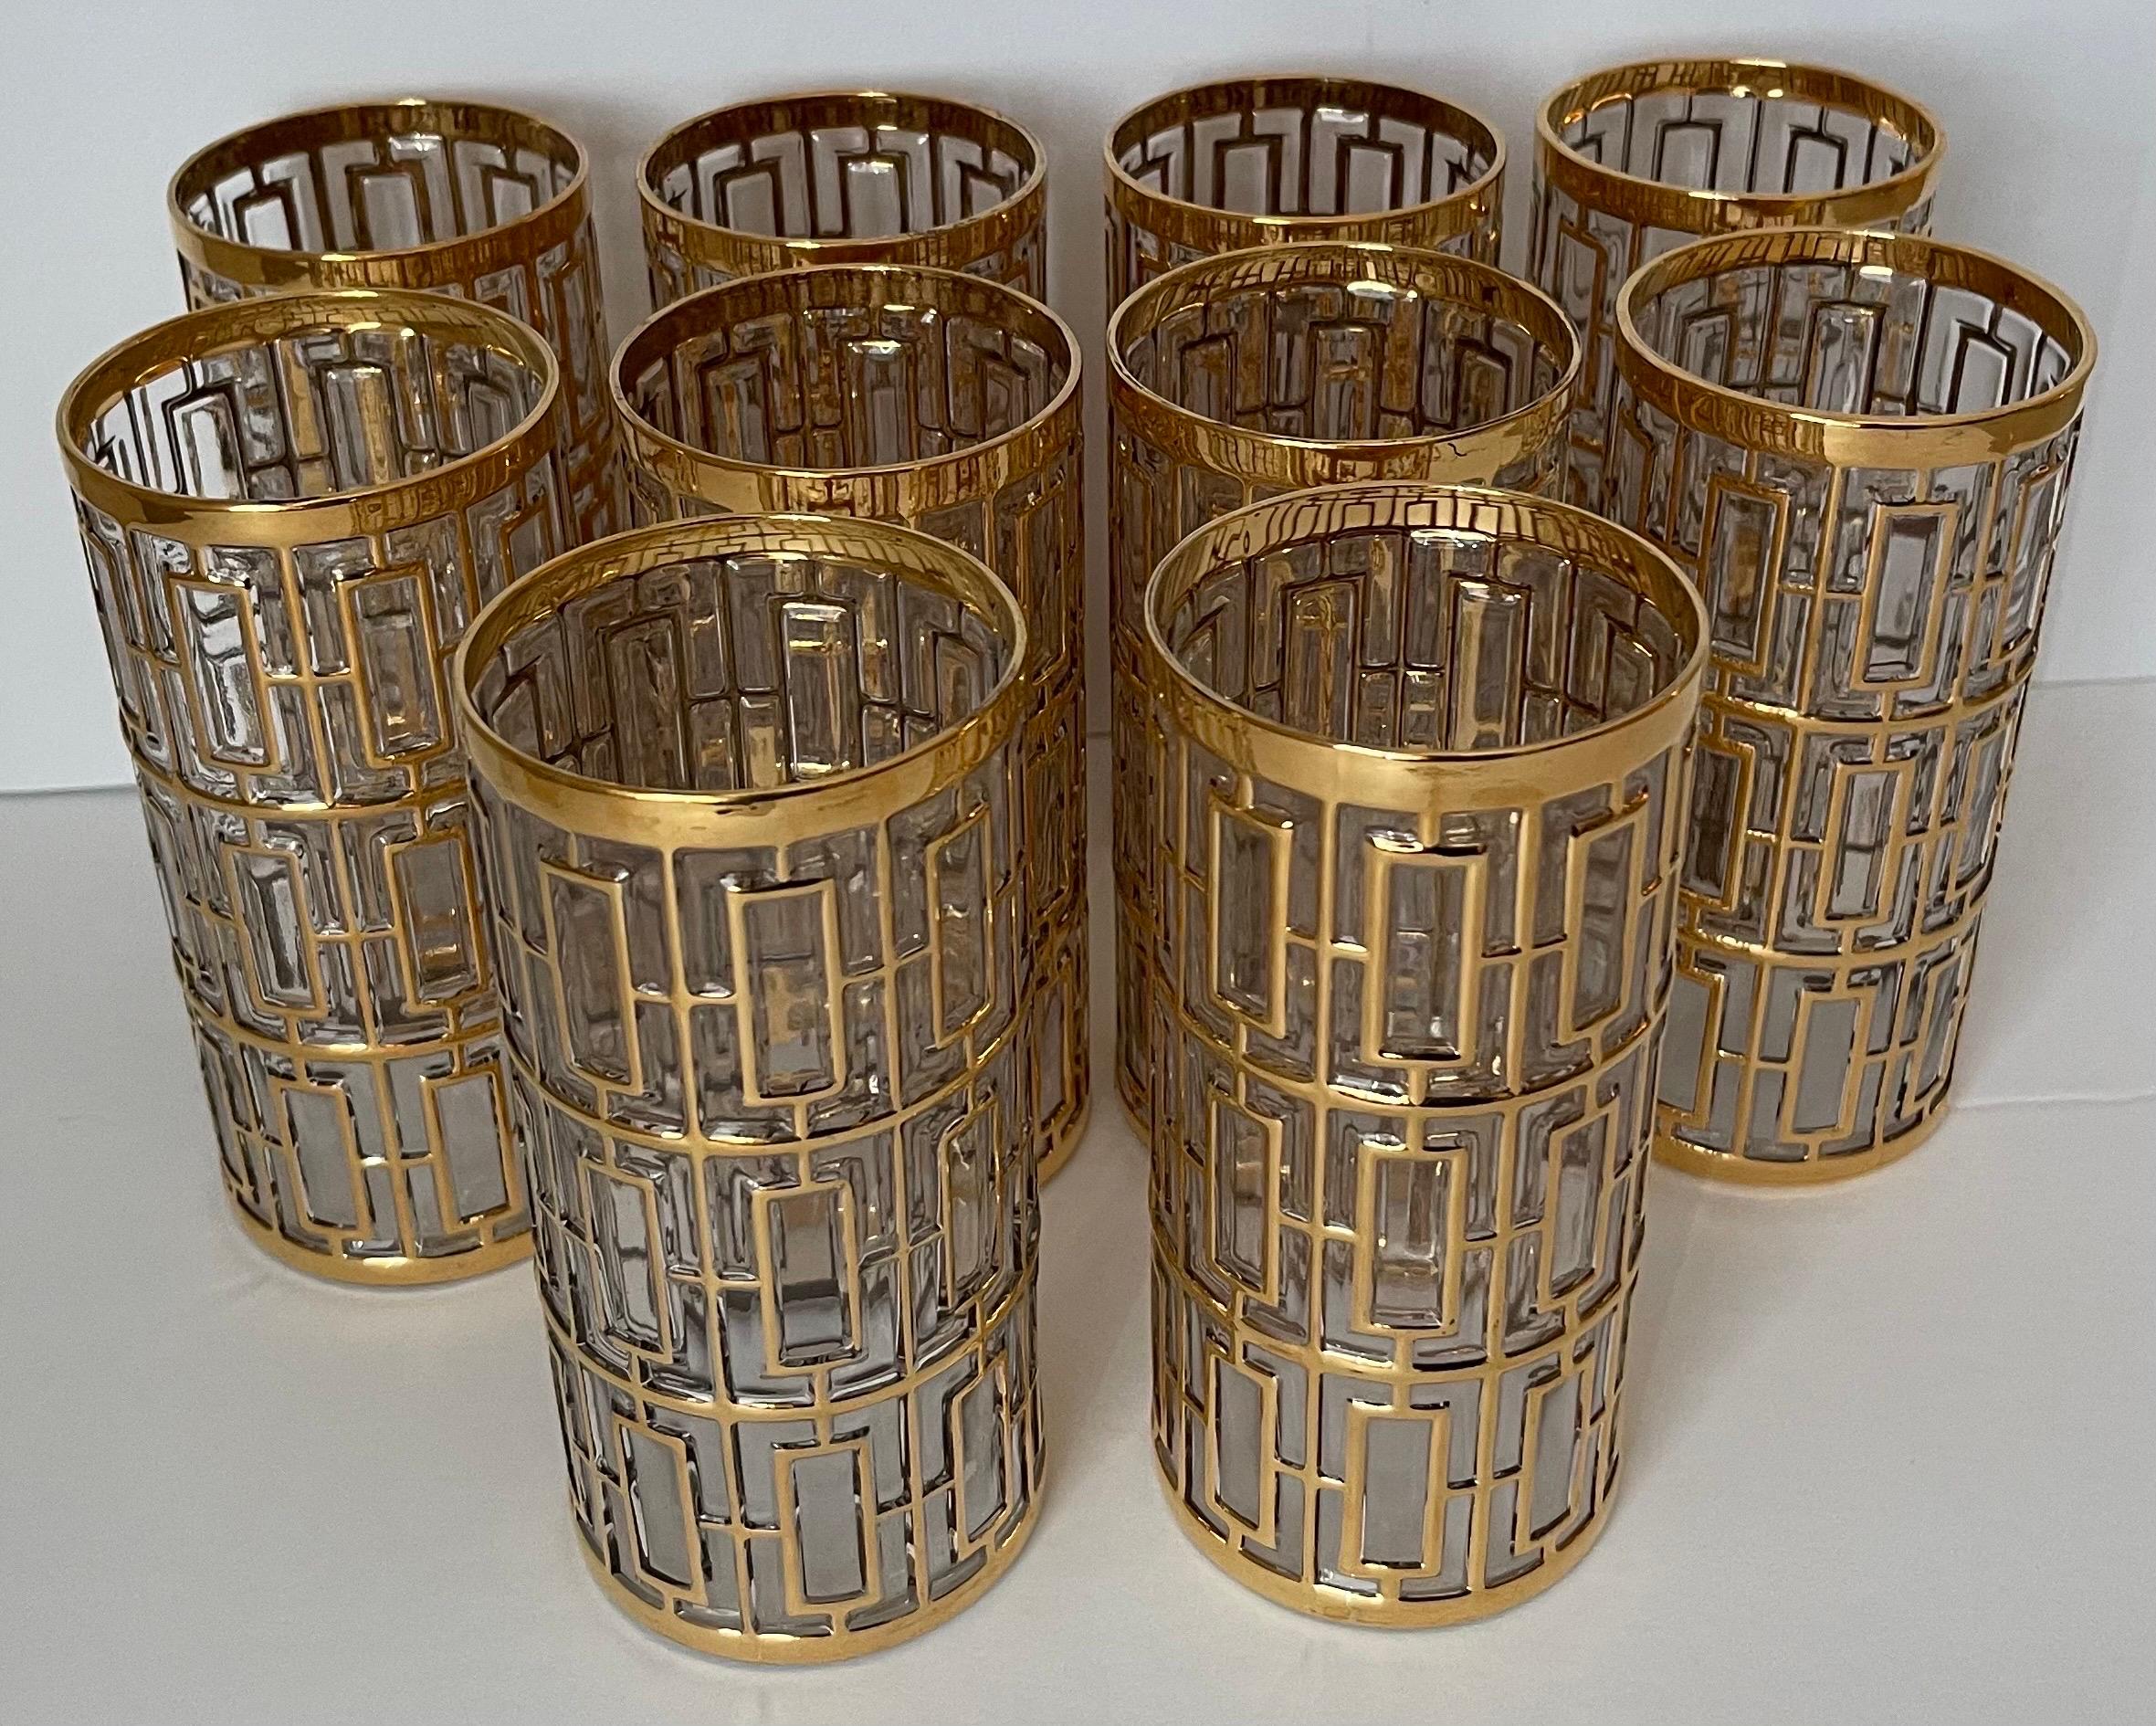 Set of ten 1960s Imperial Shoji patterned glasses. Highball style. Overall raised gold design. Stamped IG on the bottom.